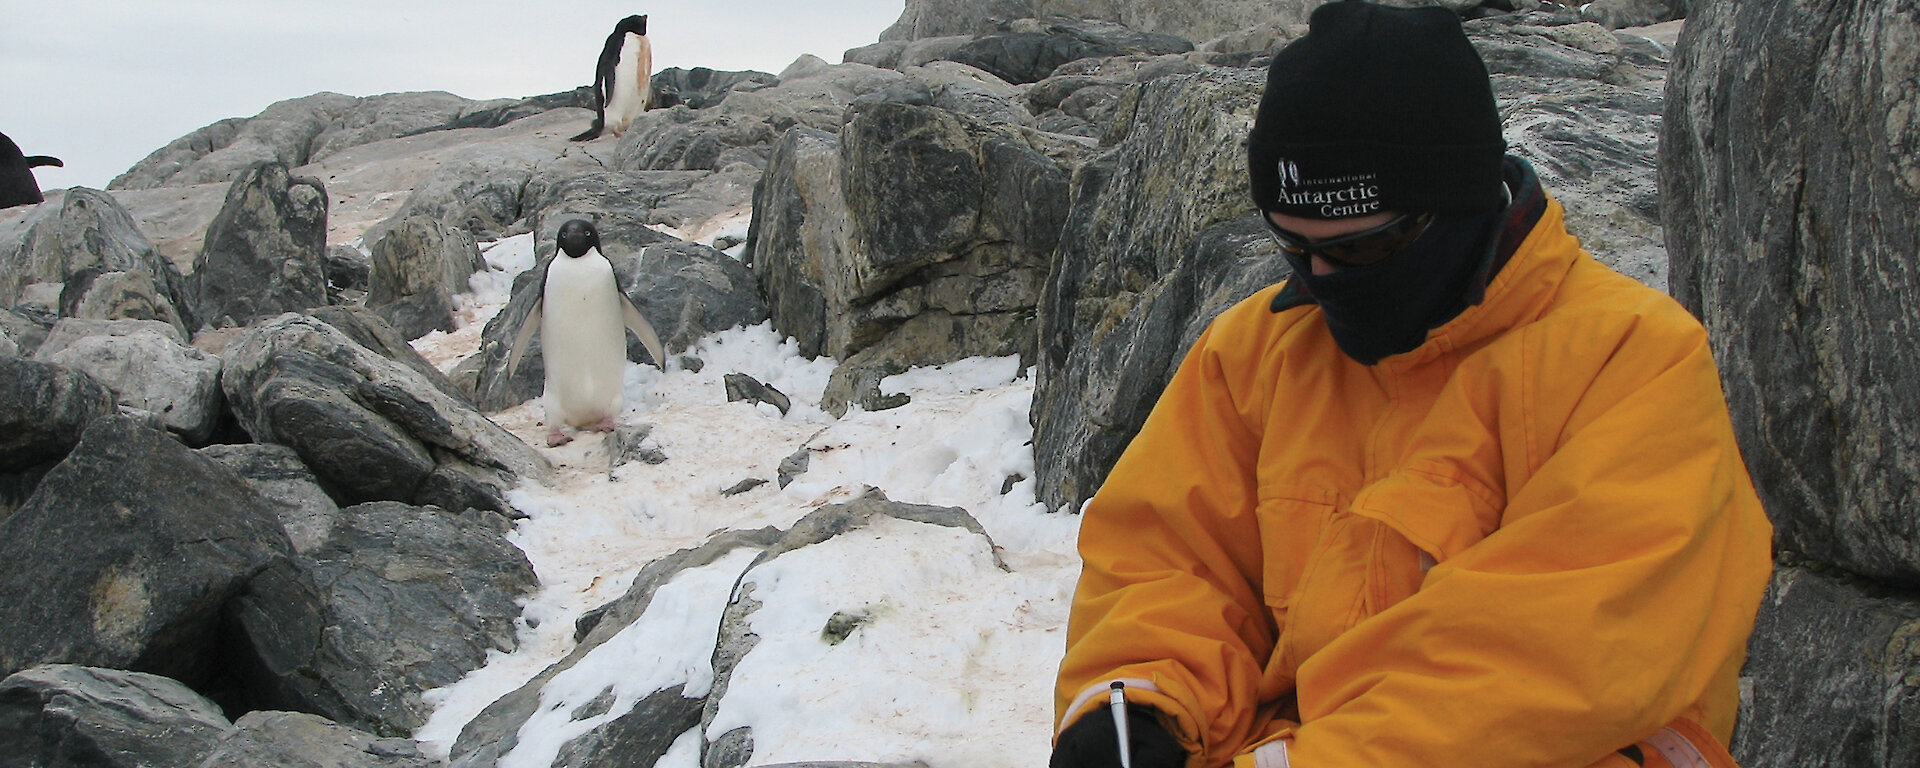 Expeditioner with Adelie penguins